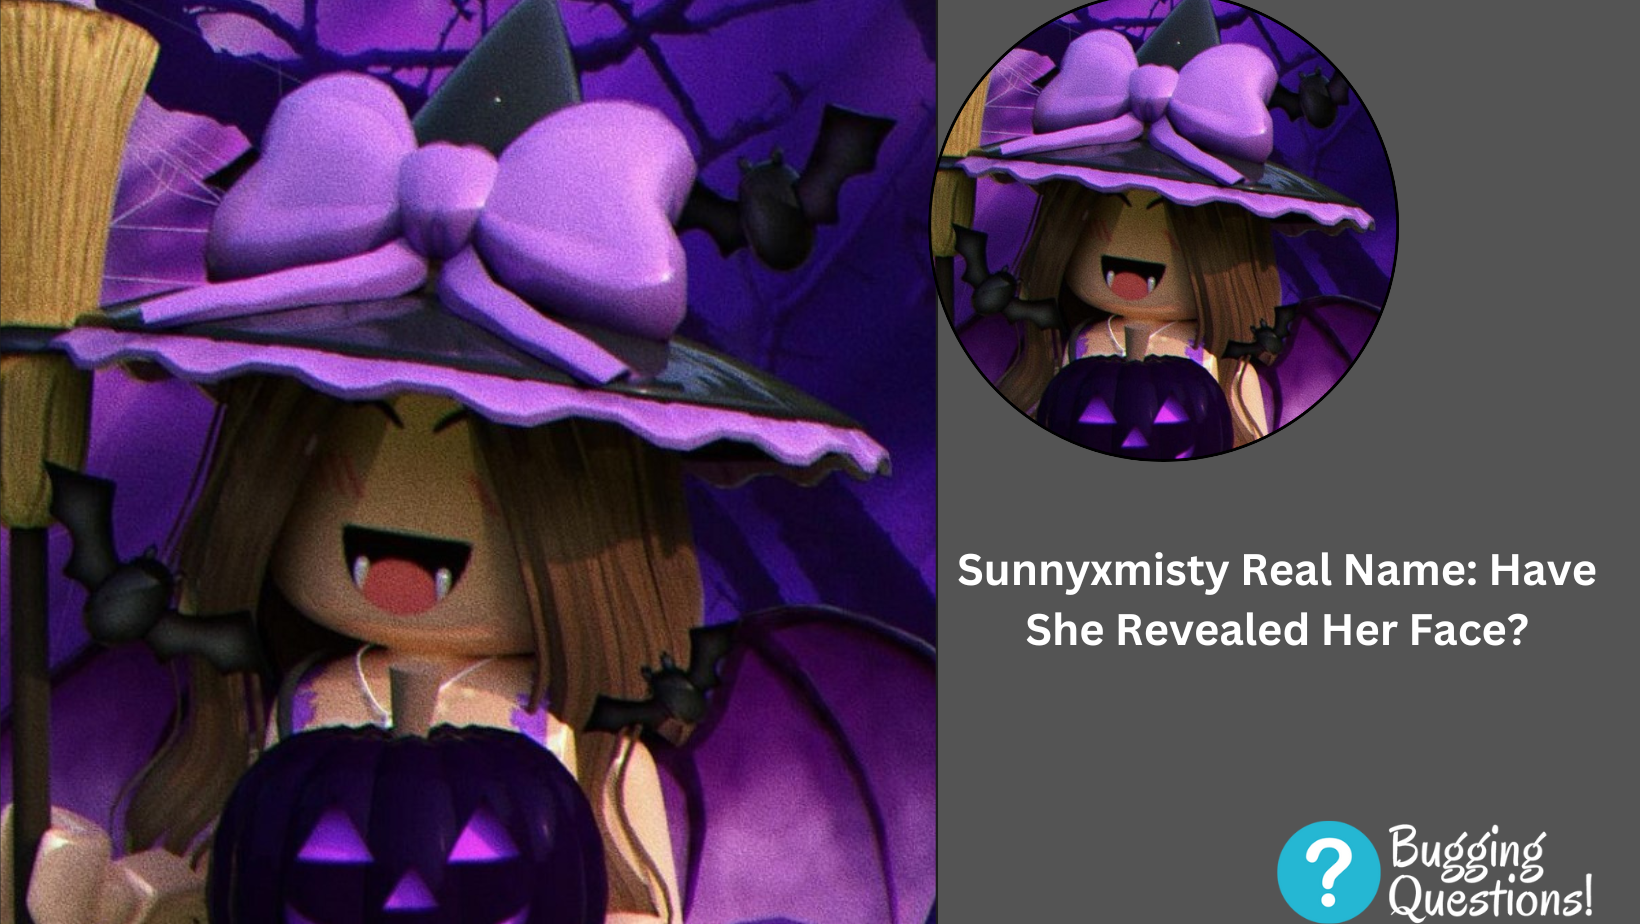 Sunnyxmisty Real Name: Have She Revealed Her Face?